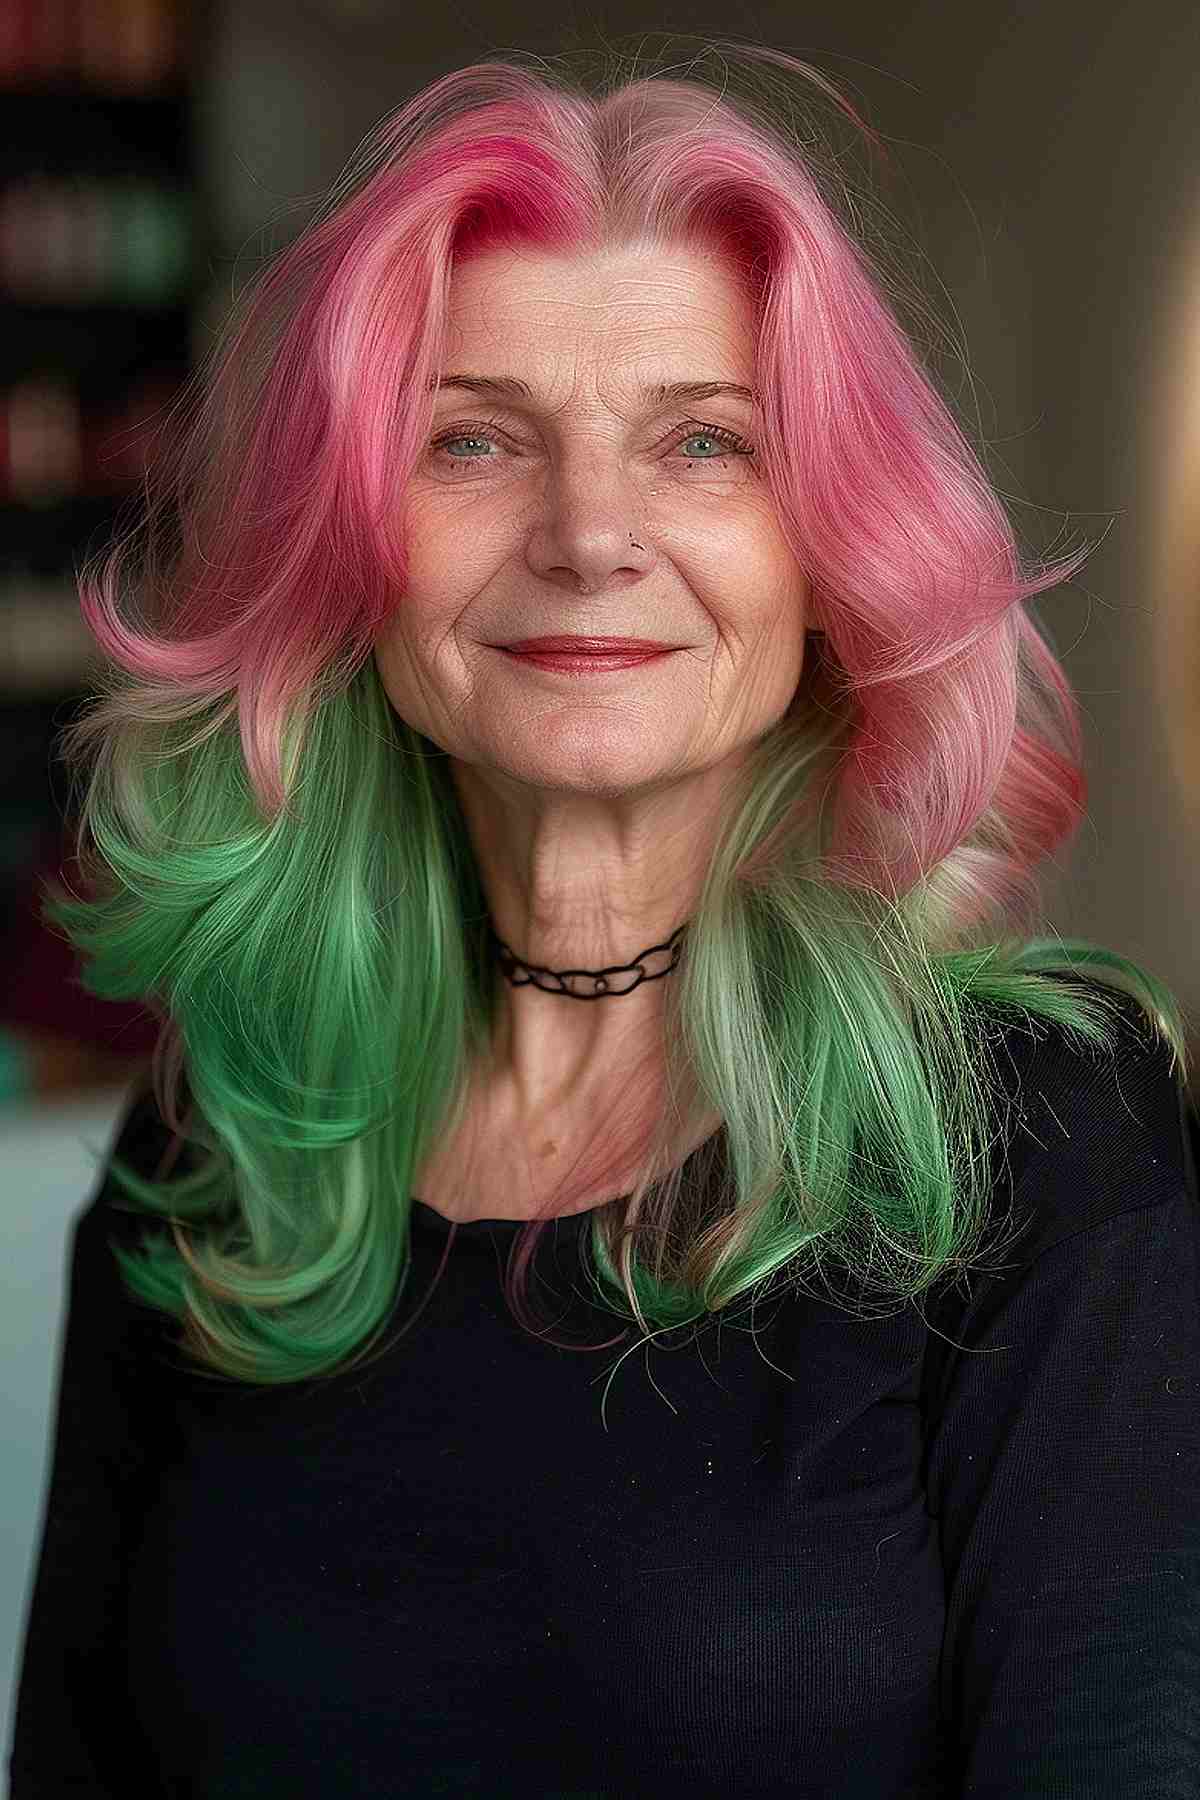 An older woman with long wavy hair colored in a gradient from bright pink to seafoam green, exemplifying a bold and stylish choice for aging gracefully.